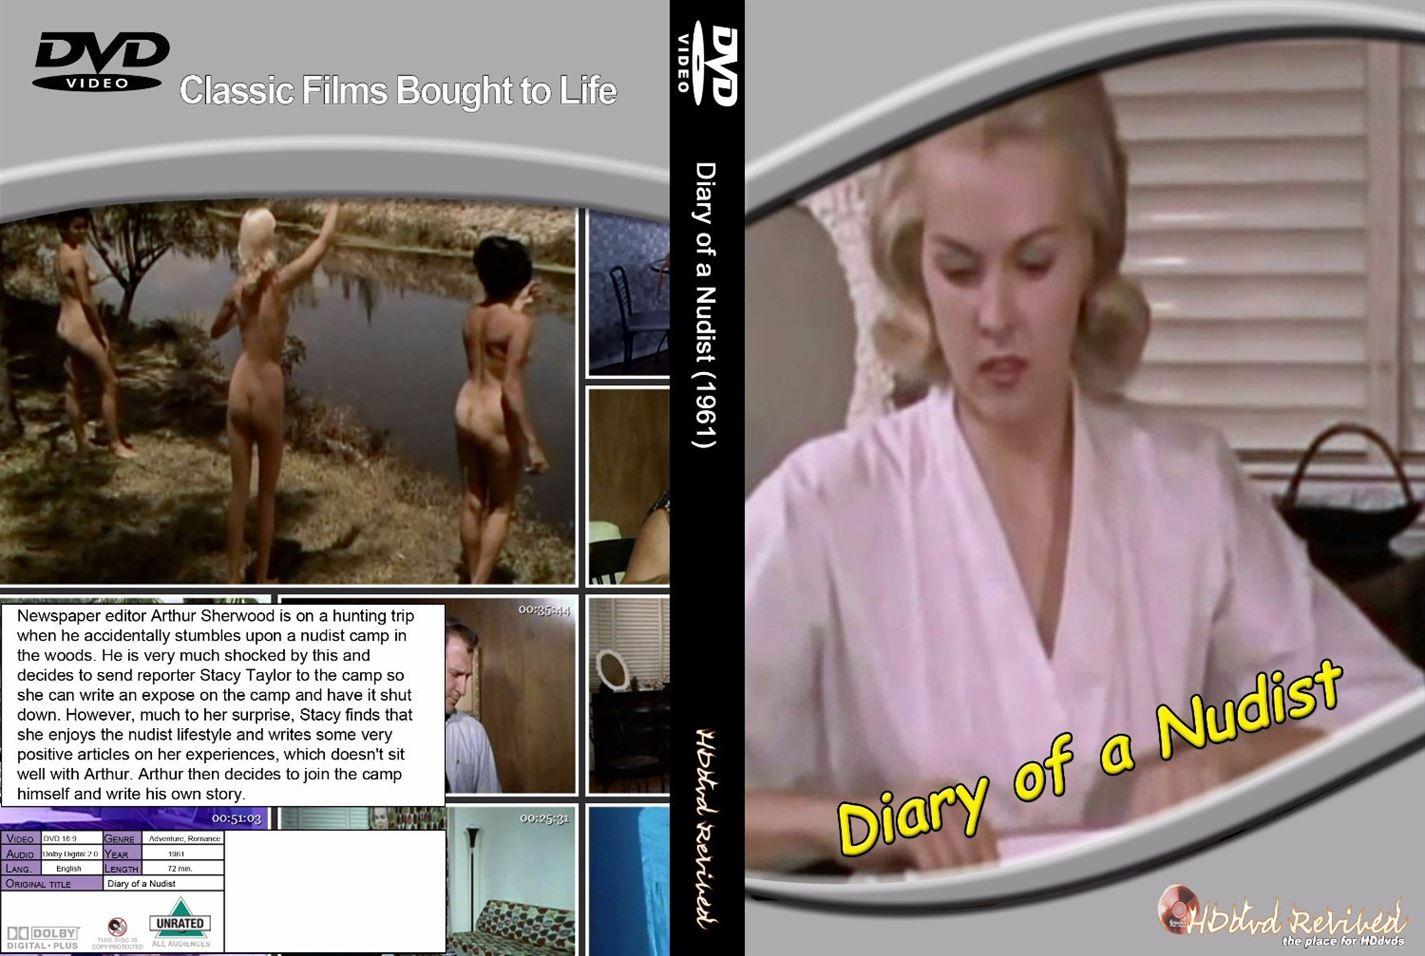 Diary of a Nudist (1961) - DVD - (HDDVD-Revived) - NEW - UK SELLER